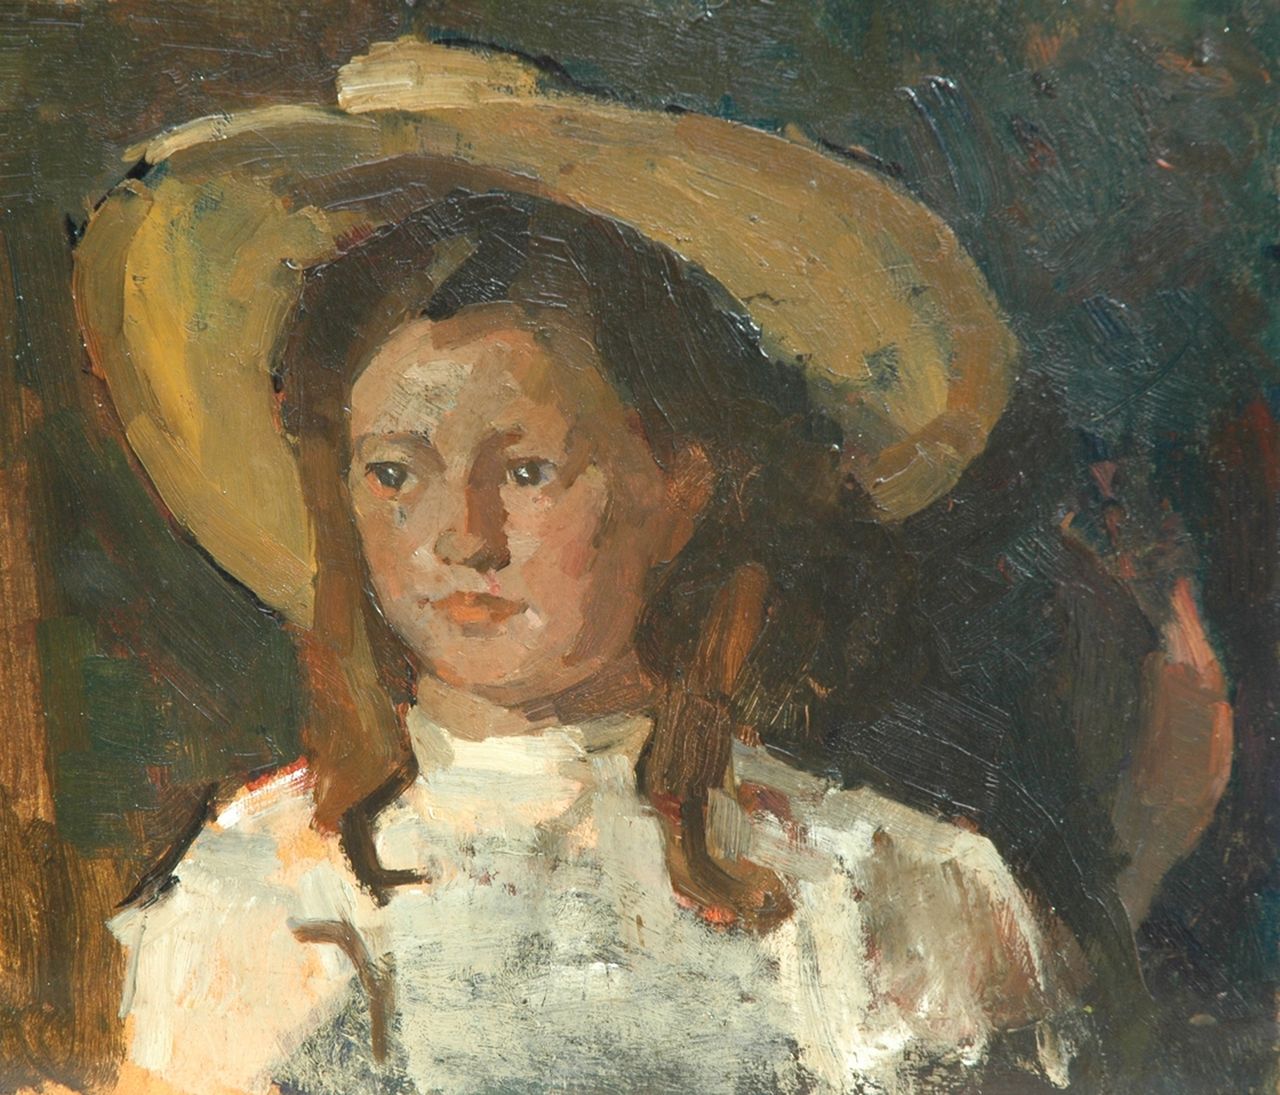 Fritzlin M.C.L.  | Maria Charlotta 'Louise' Fritzlin, Fokeltje with yellow hat, oil on board laid down on panel 31.7 x 36.7 cm, painted in 1908